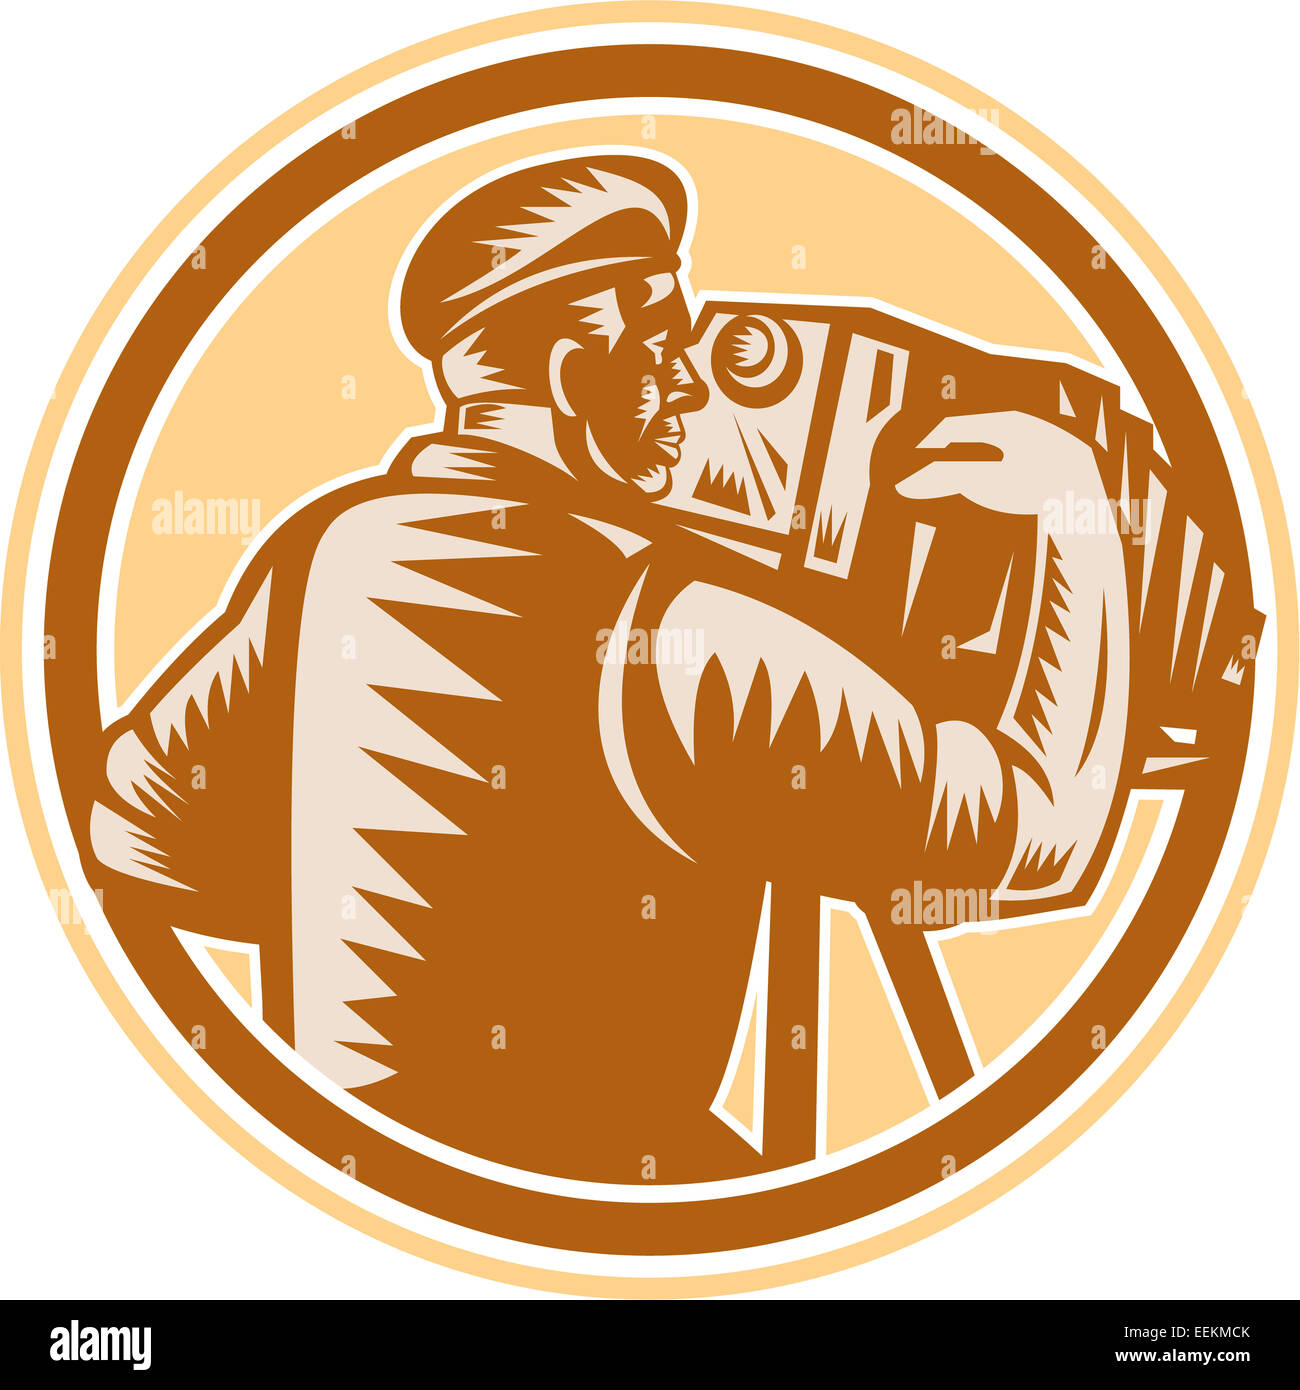 Illustration of a photographer shooting aiming with vintage bellows camera set inside circle on isolated background done in retro woodcut style. Stock Photo